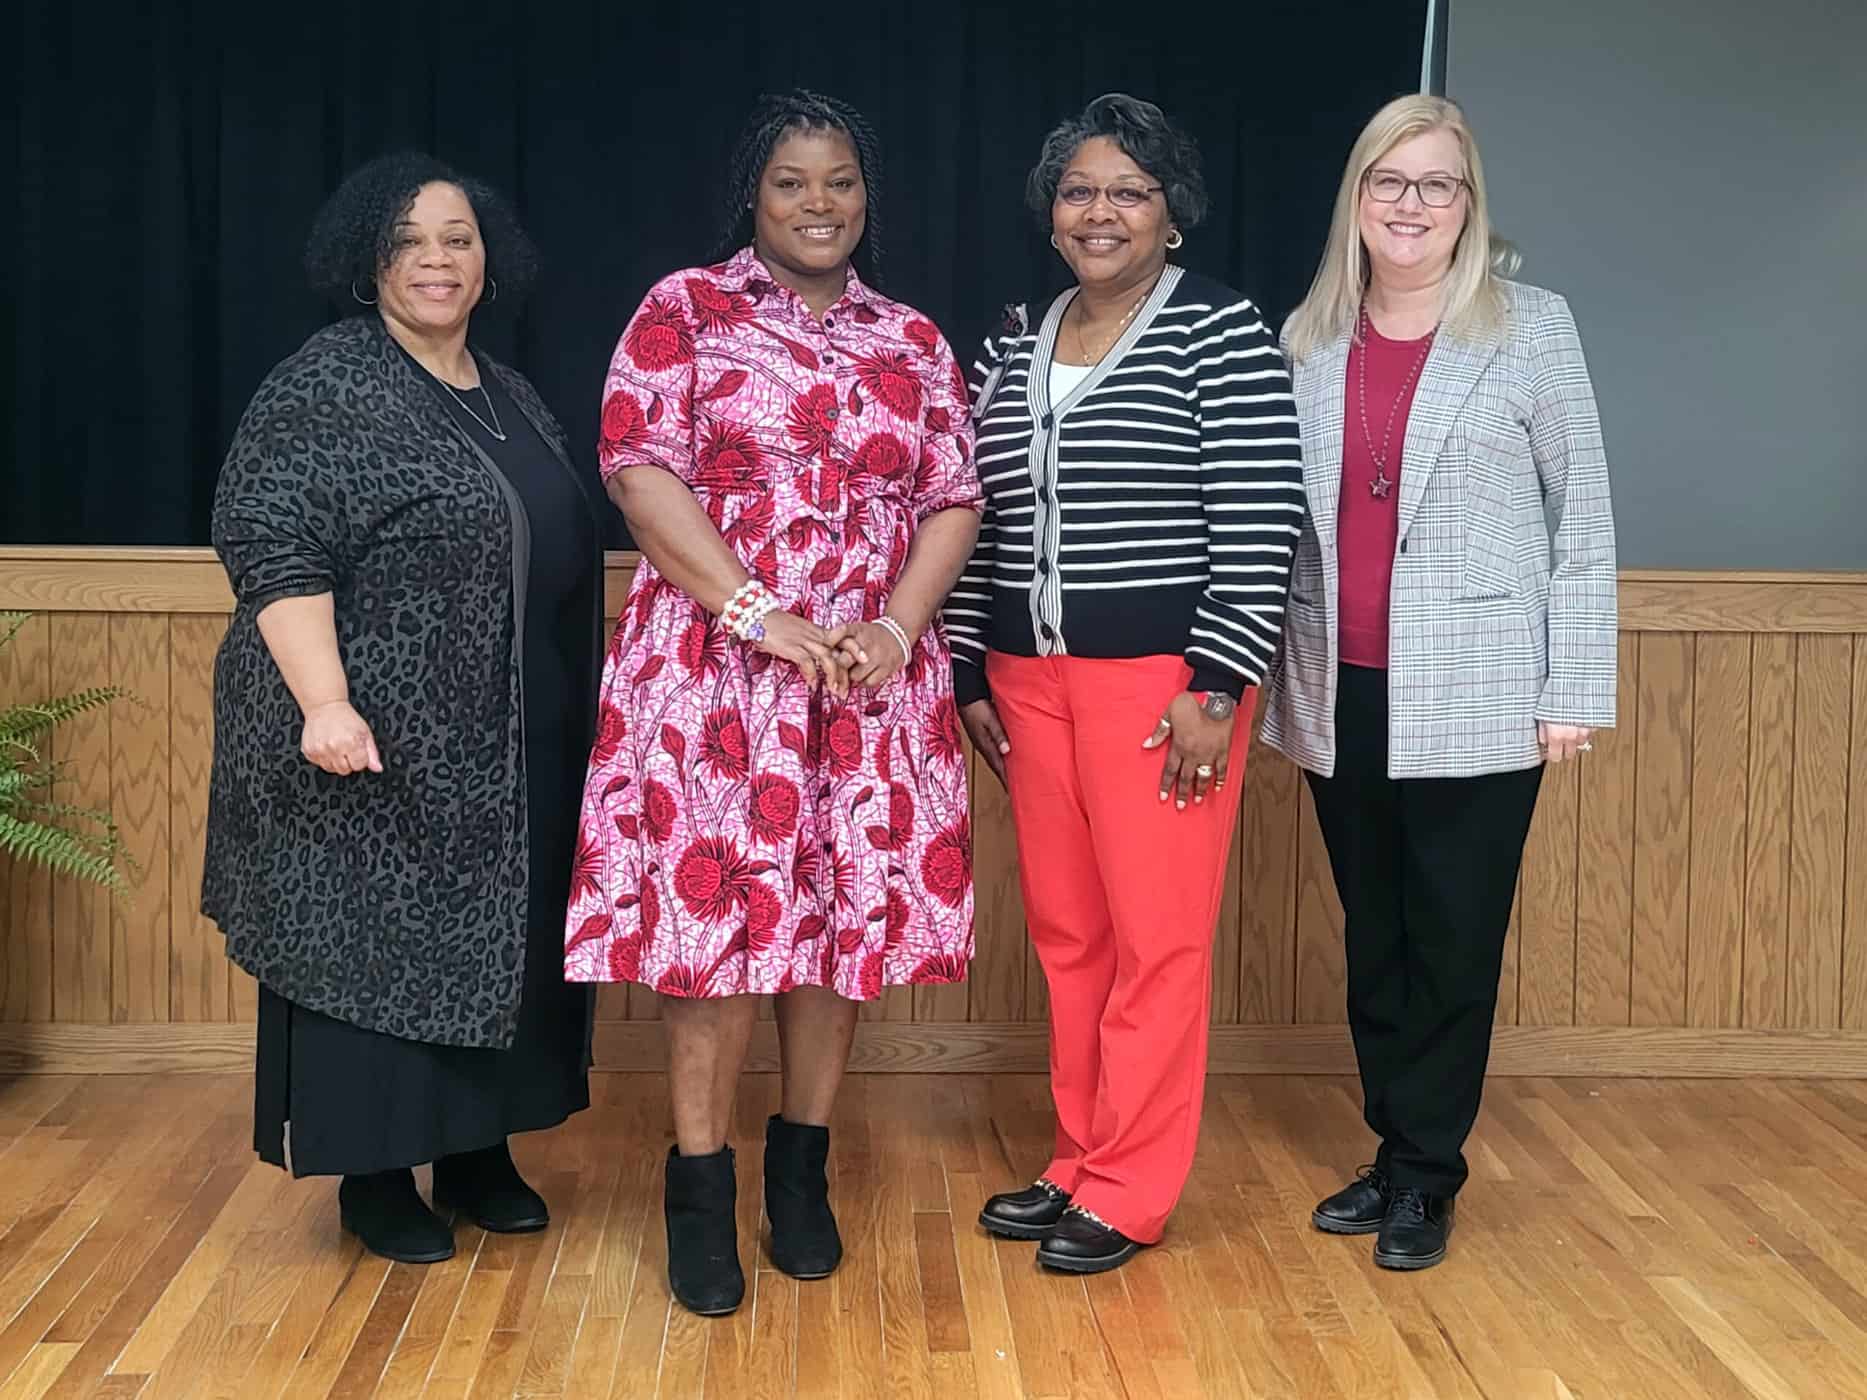 Picture (l-r) are SGTC Business and Office Technology Instructor Nicole Turner, Institutional Effectiveness Director and Grants Coordinator Katrice Martin, Accounting Instructor Tammy Hamilton, and Assistant Vice President for Academic Affairs Michelle McGowan. Martin was the featured speaker at the SGTC Crisp County Center Black History Month program.